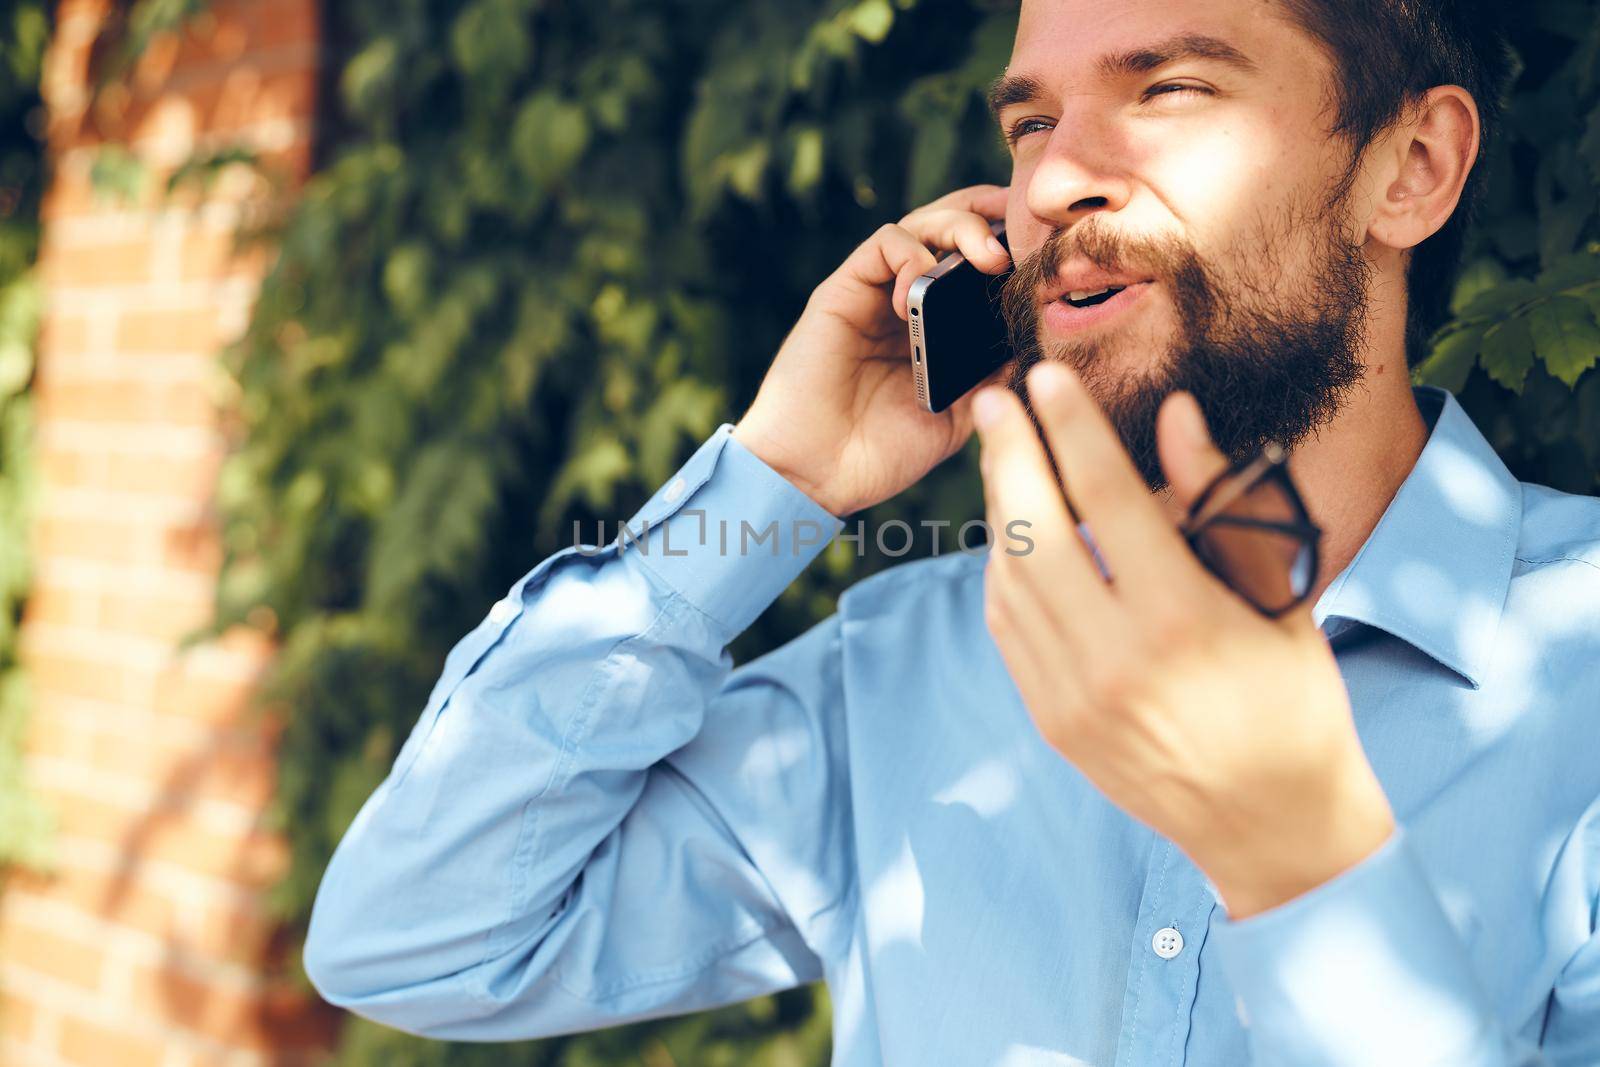 business man with phone outdoors communication lifestyle by Vichizh